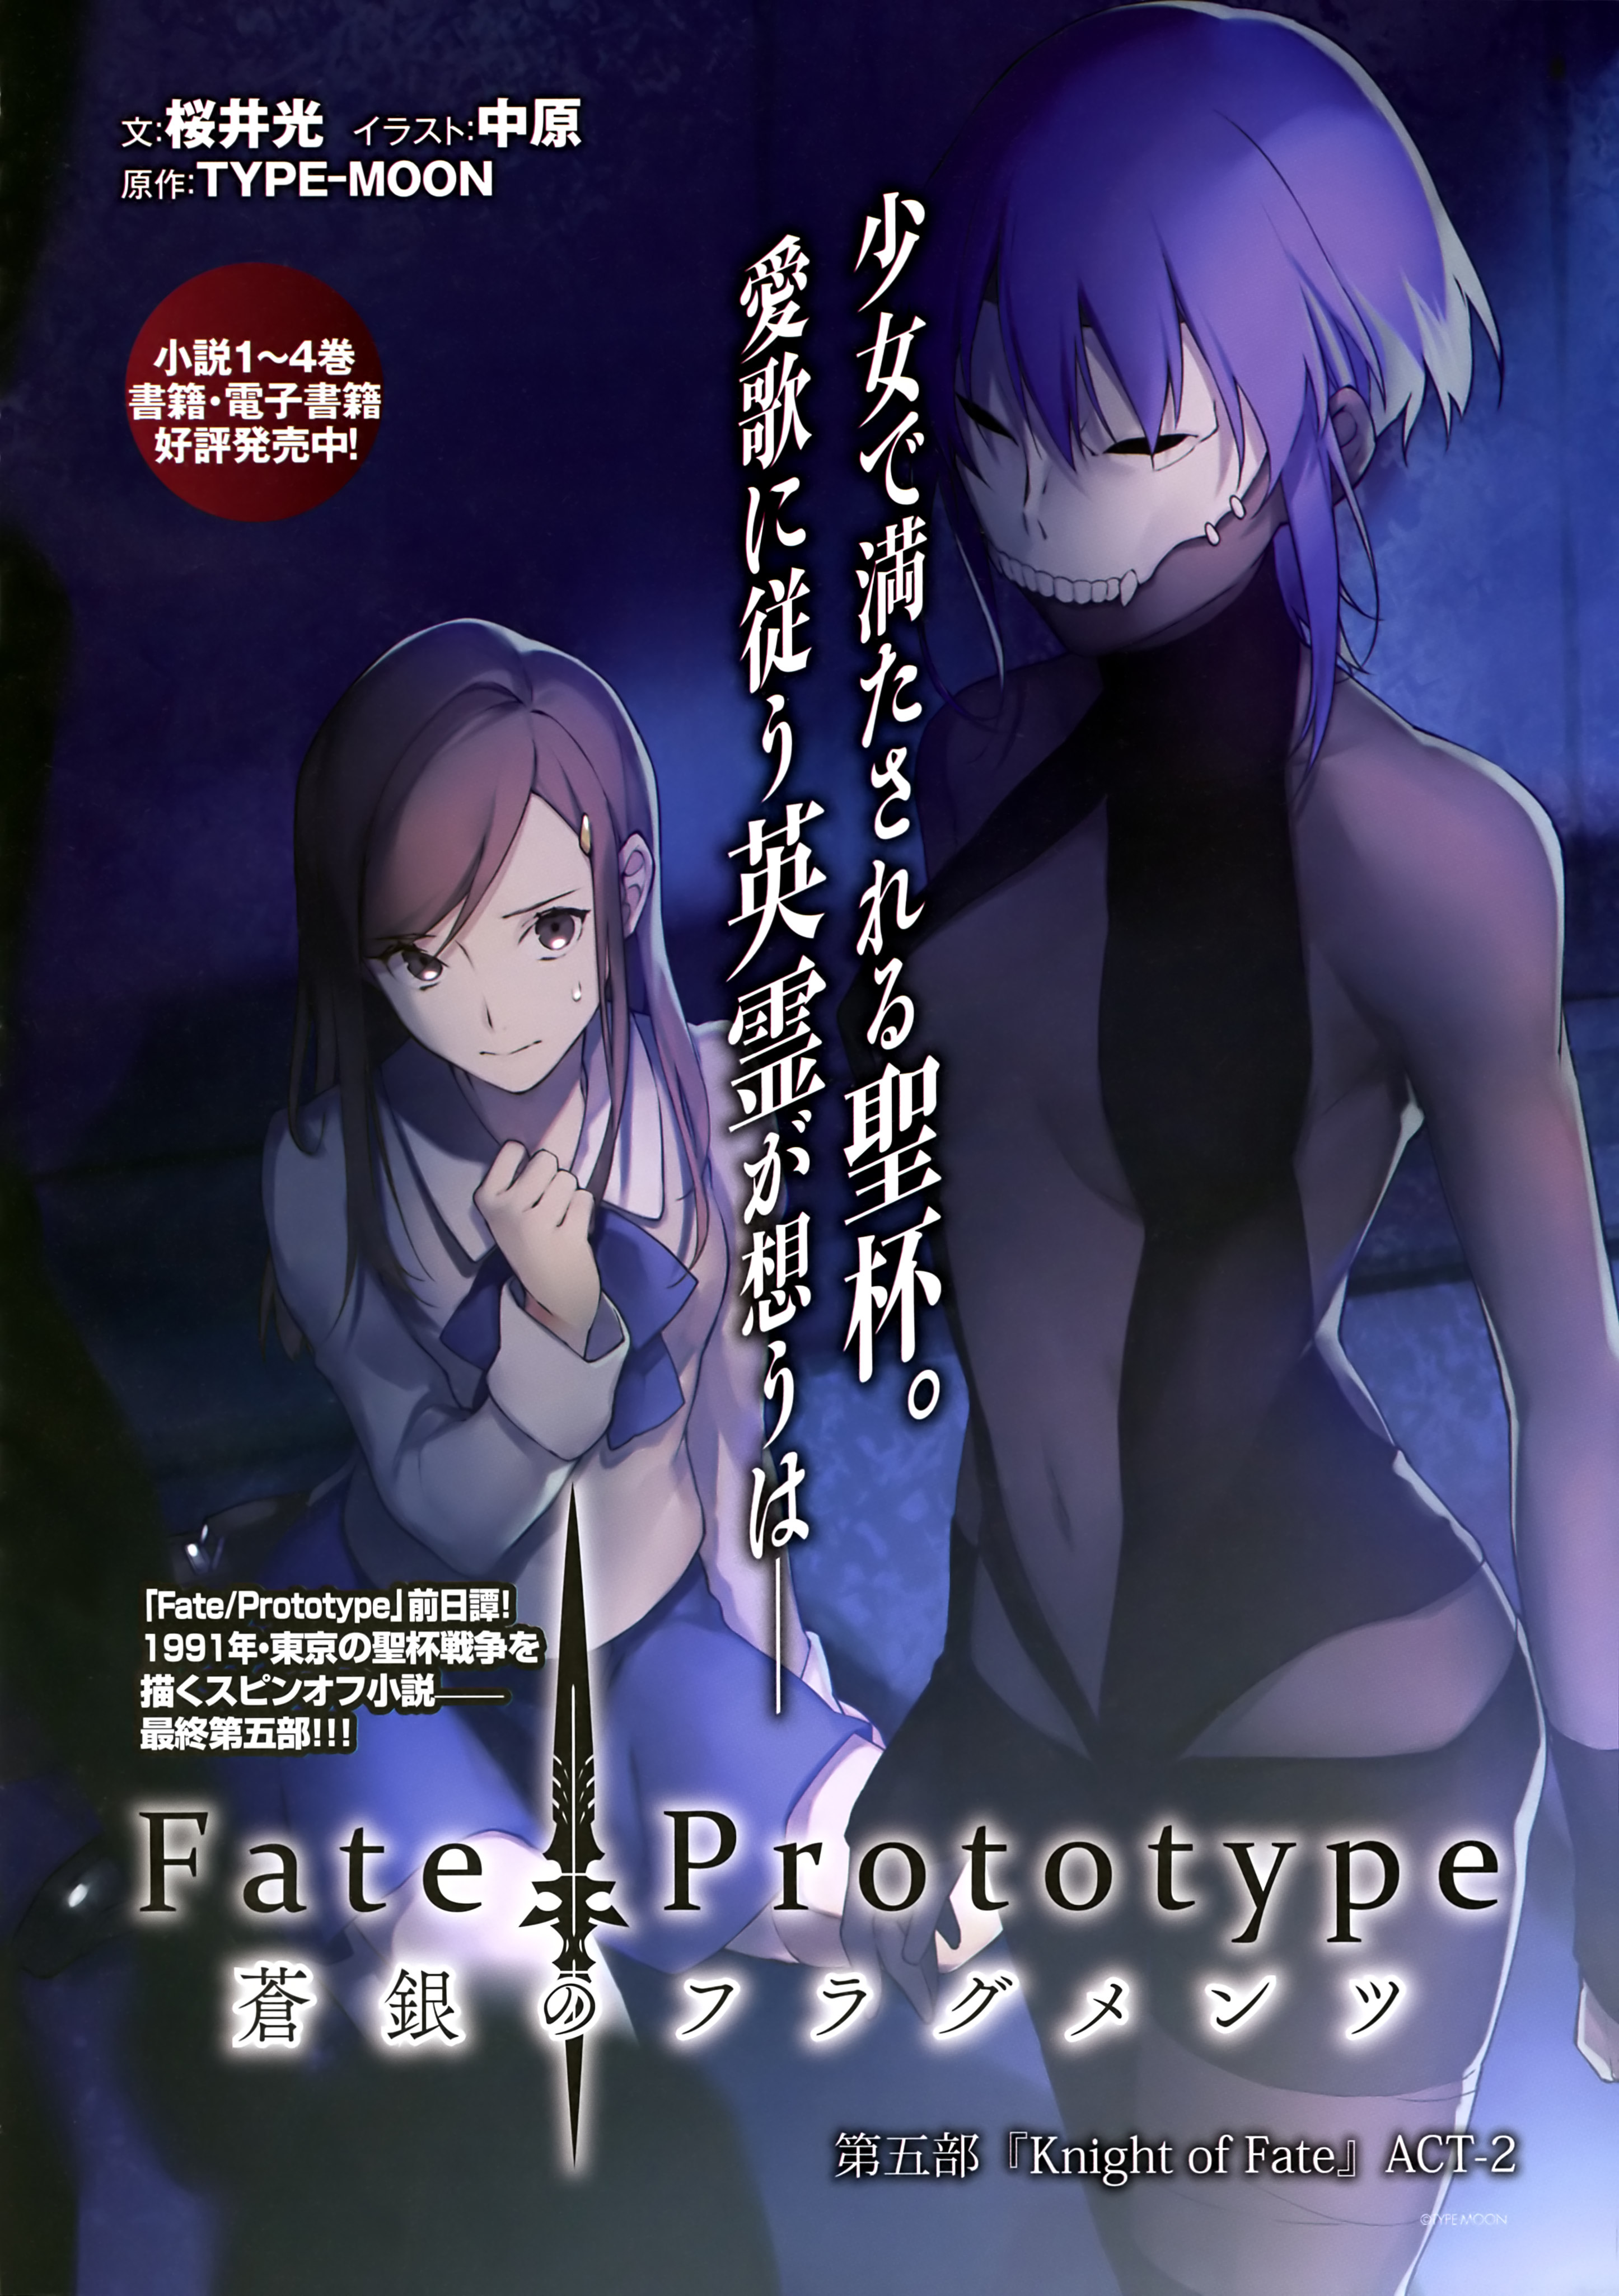 Type Moon Nakahara Fate Prototype Fate Prototype Fragments Of Blue And Silver Fate Stay Night Bandages Cleavage No Bra Seifuku Yande Re